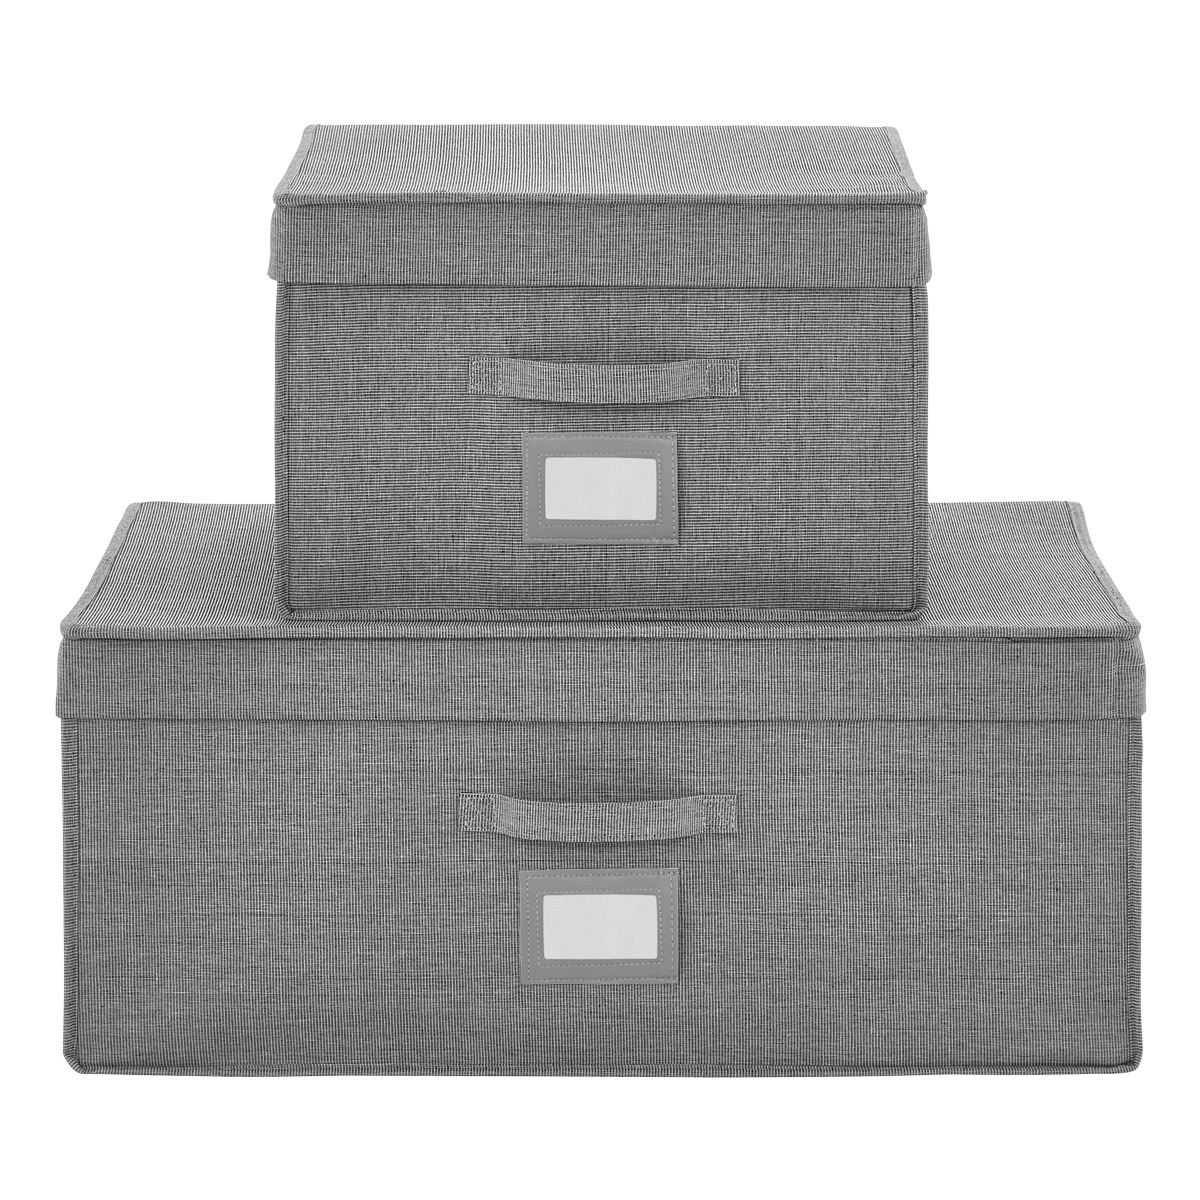 Large Storage Box w/ Vacuum Bag Grey, 25-1/4 x 19-1/4 x 10-1/2 H | The Container Store